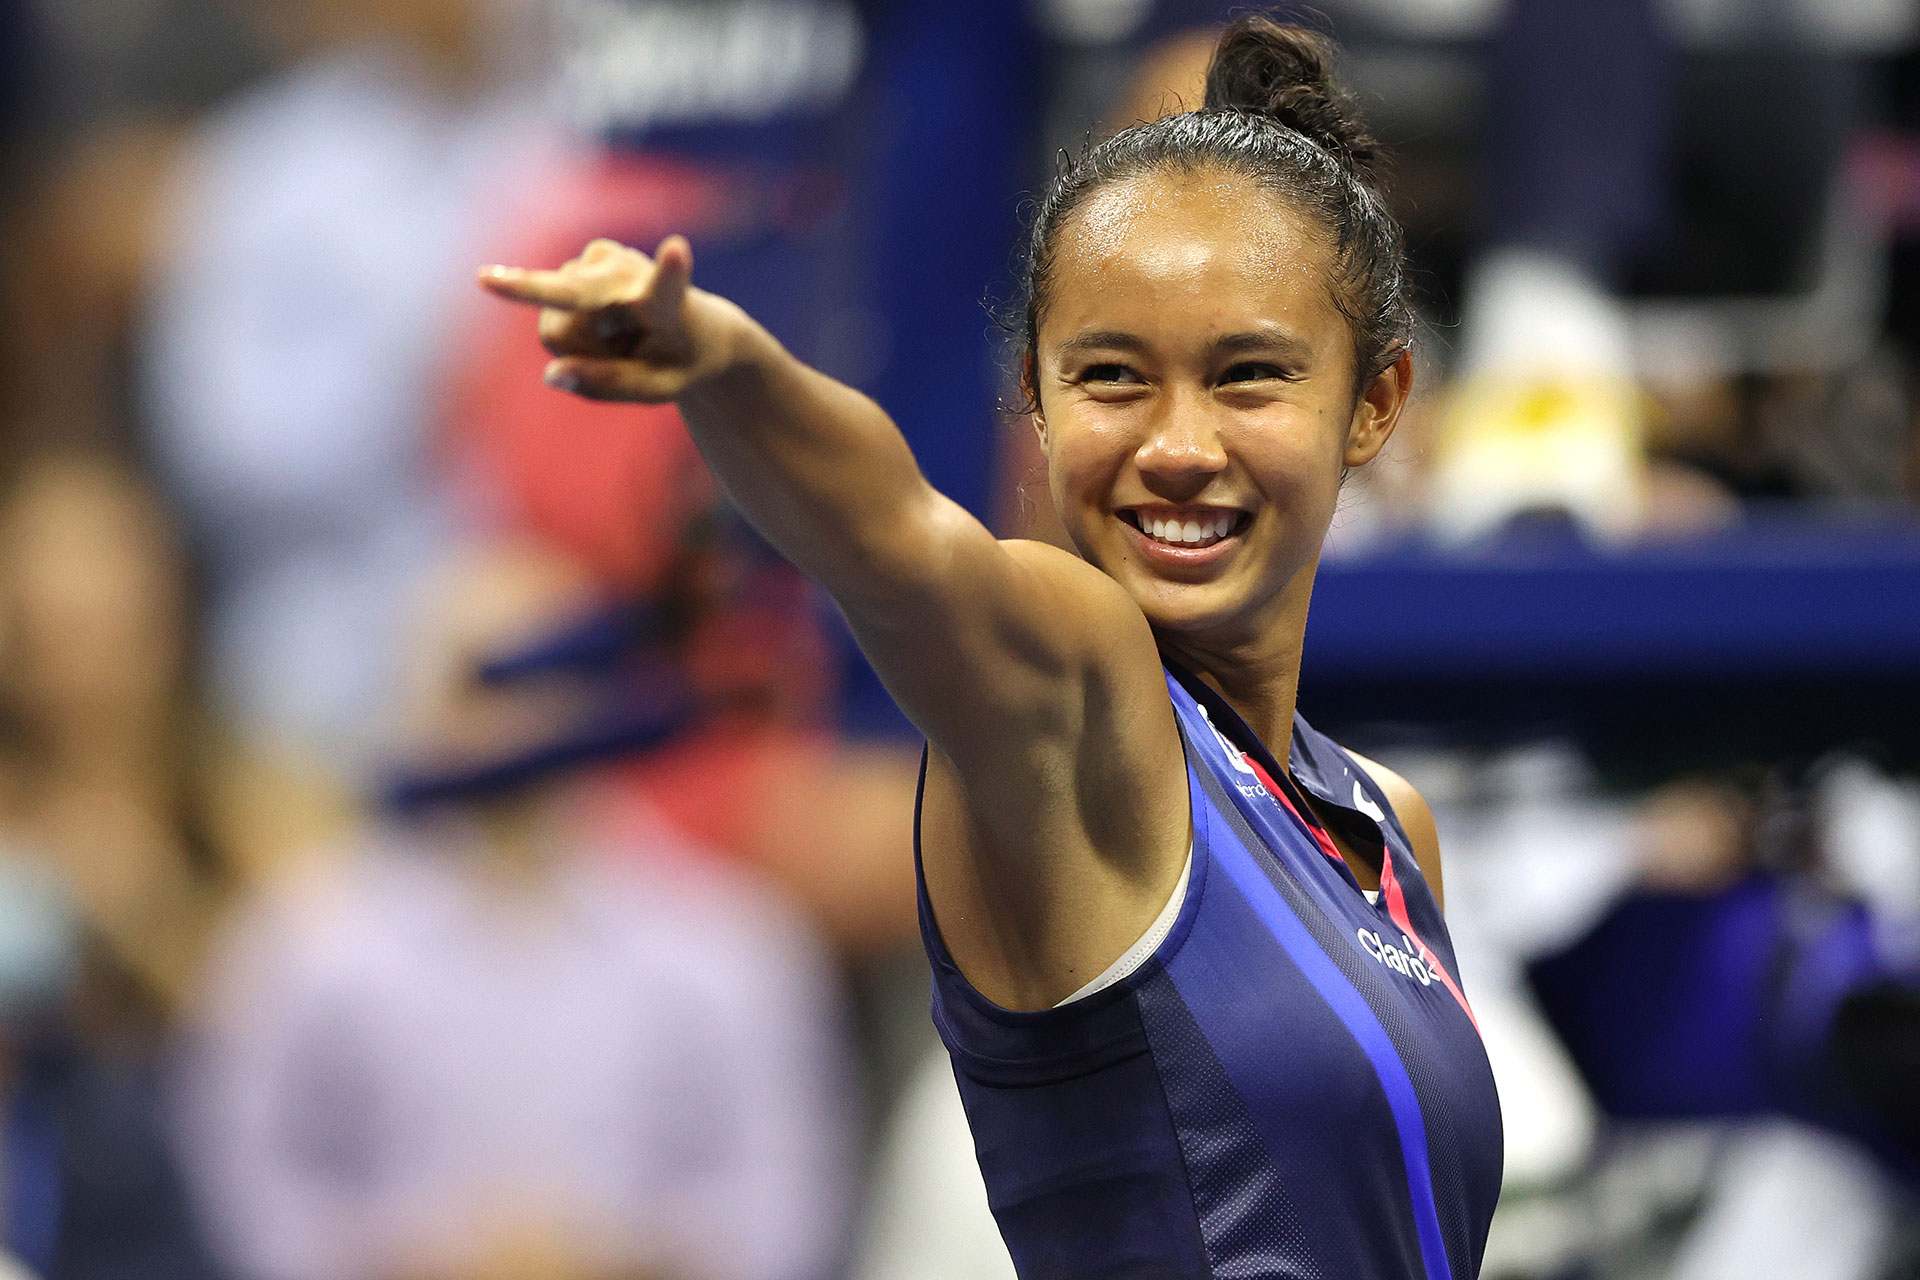 Leylah Annie Fernandez of Canada celebrates defeating Aryna Sabalenka of Belarus during her Women’s Singles semifinals match on Day Eleven of the 2021 US Open at the USTA Billie Jean King National Tennis Center on September 09, 2021 in the Flushing neighborhood of the Queens borough of New York City.